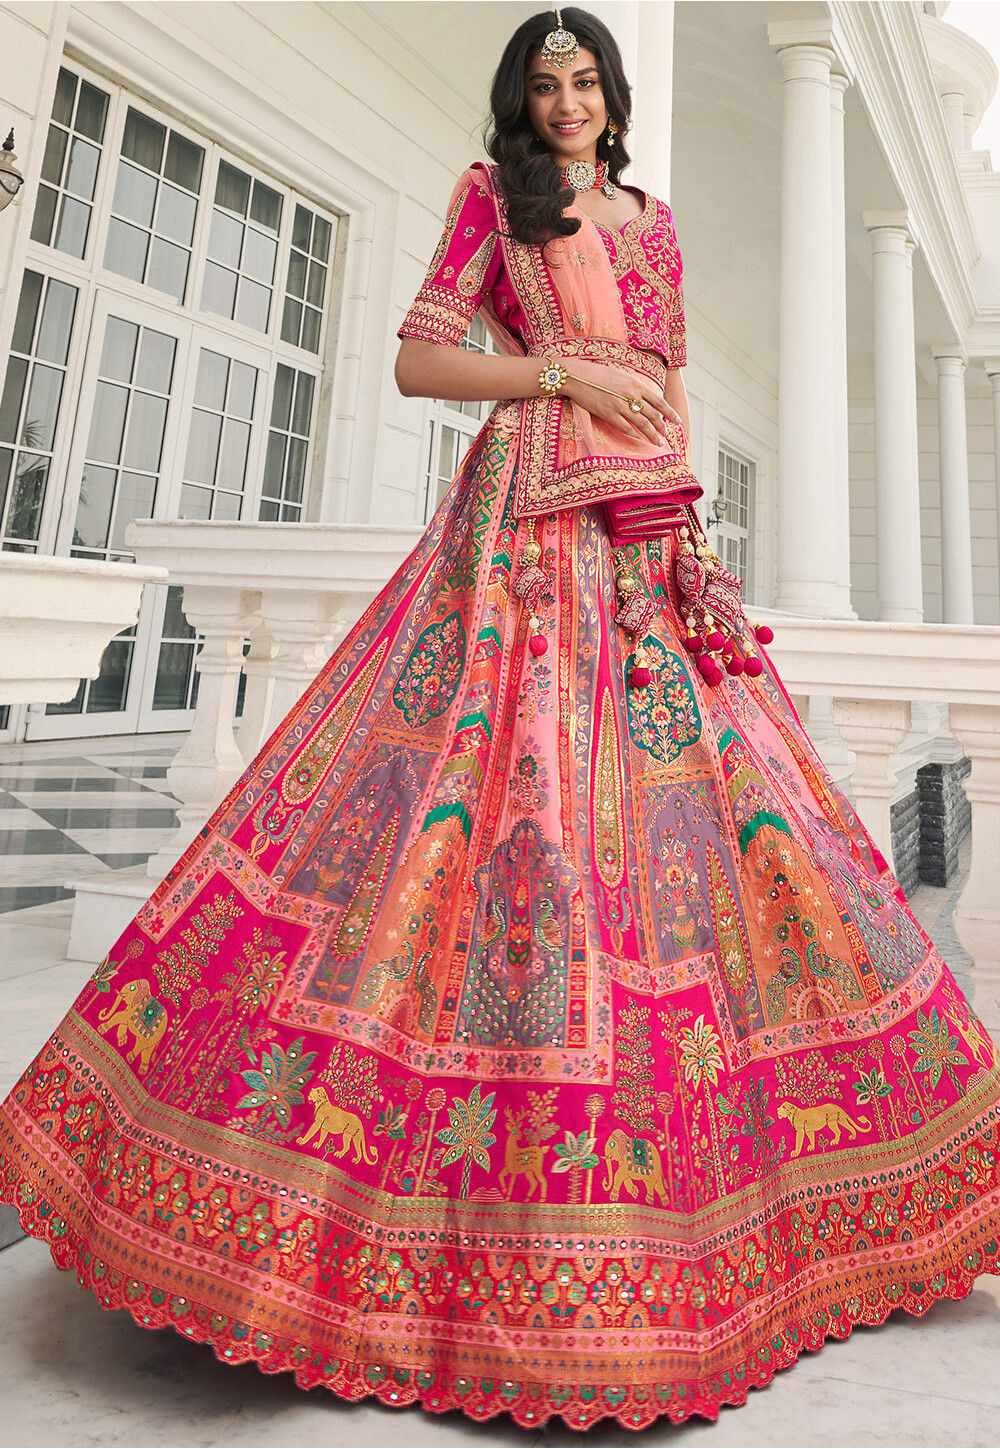 Bridal Lehenga Choli in Pink Color with Heavy Embroidery Pea